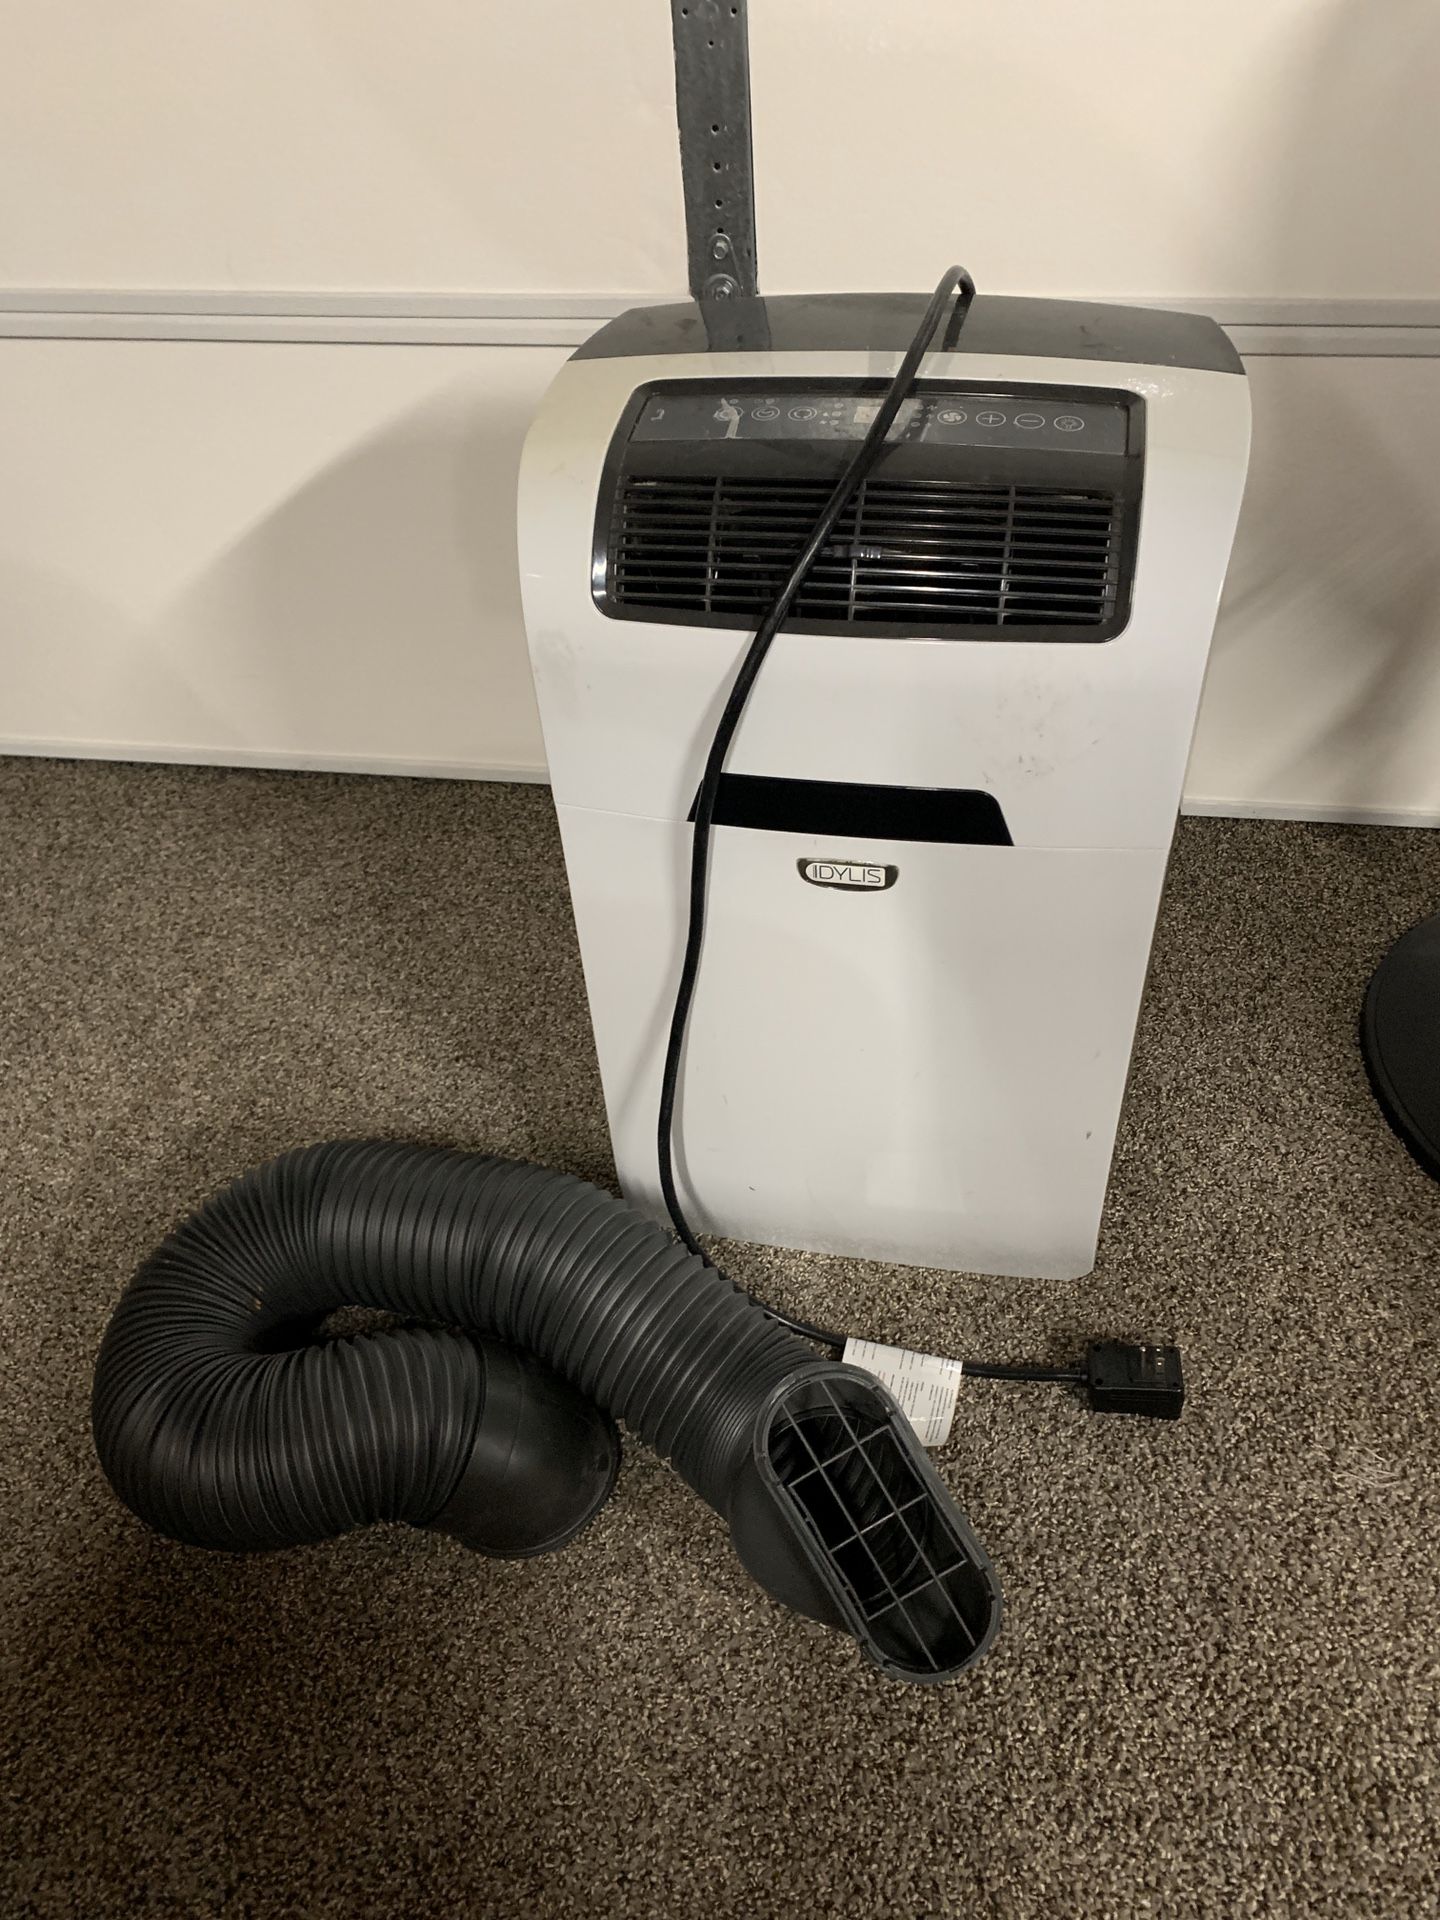 IDYLIS Air Conditioner, Fan, and Dehumidifier